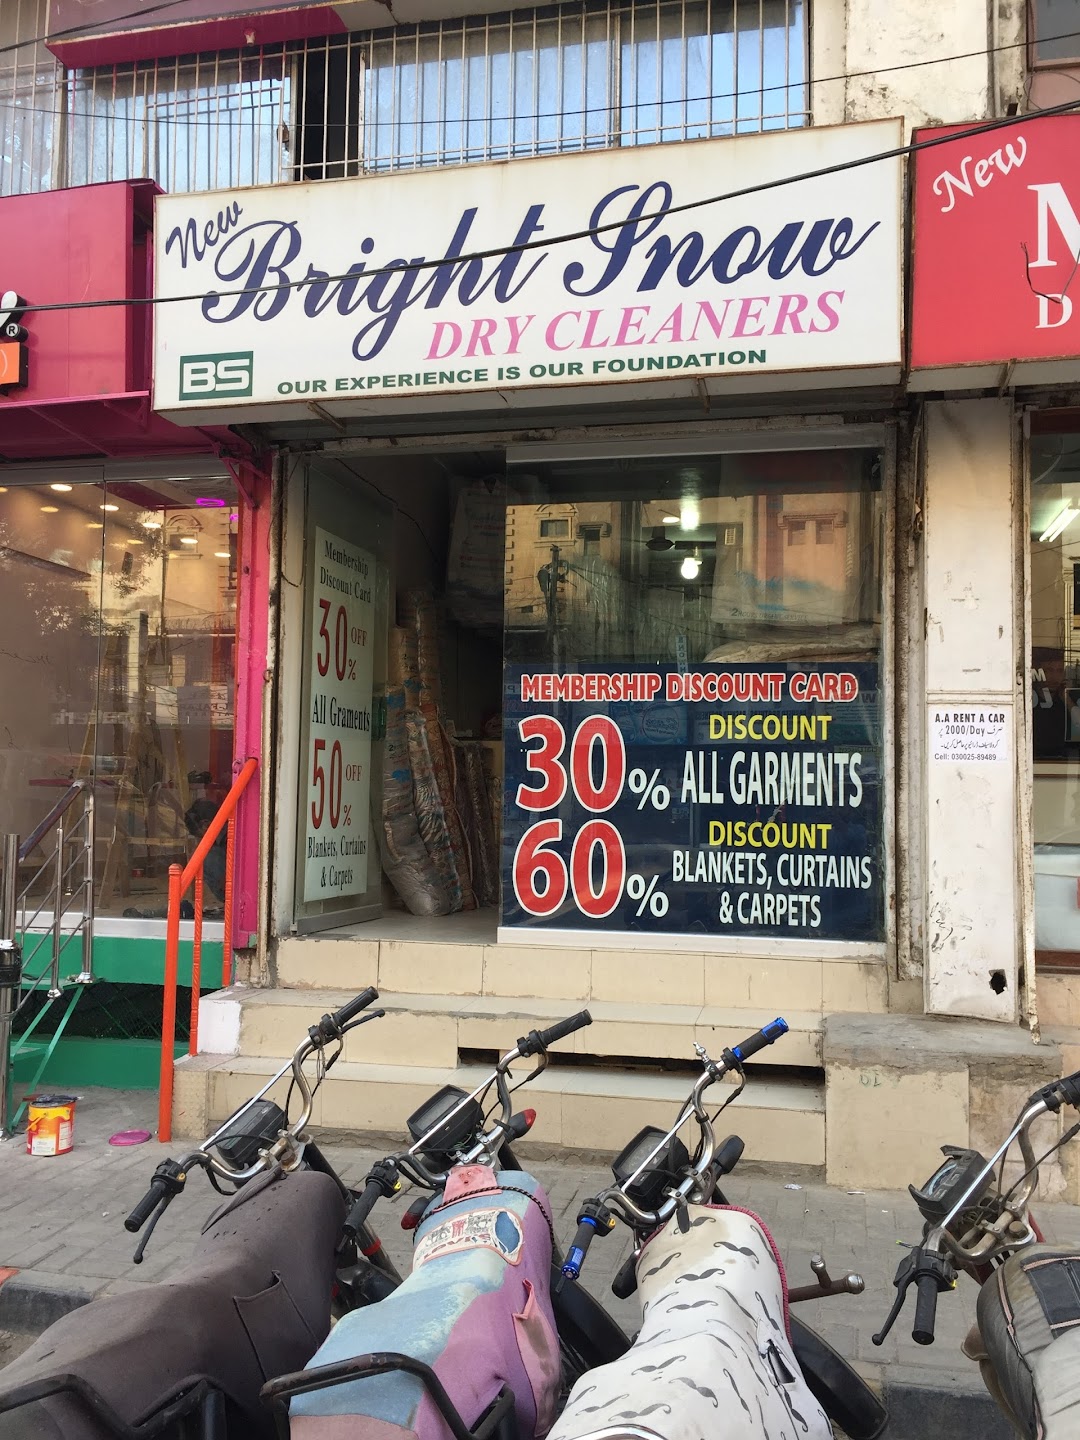 New Bright Snow Dry Cleaners